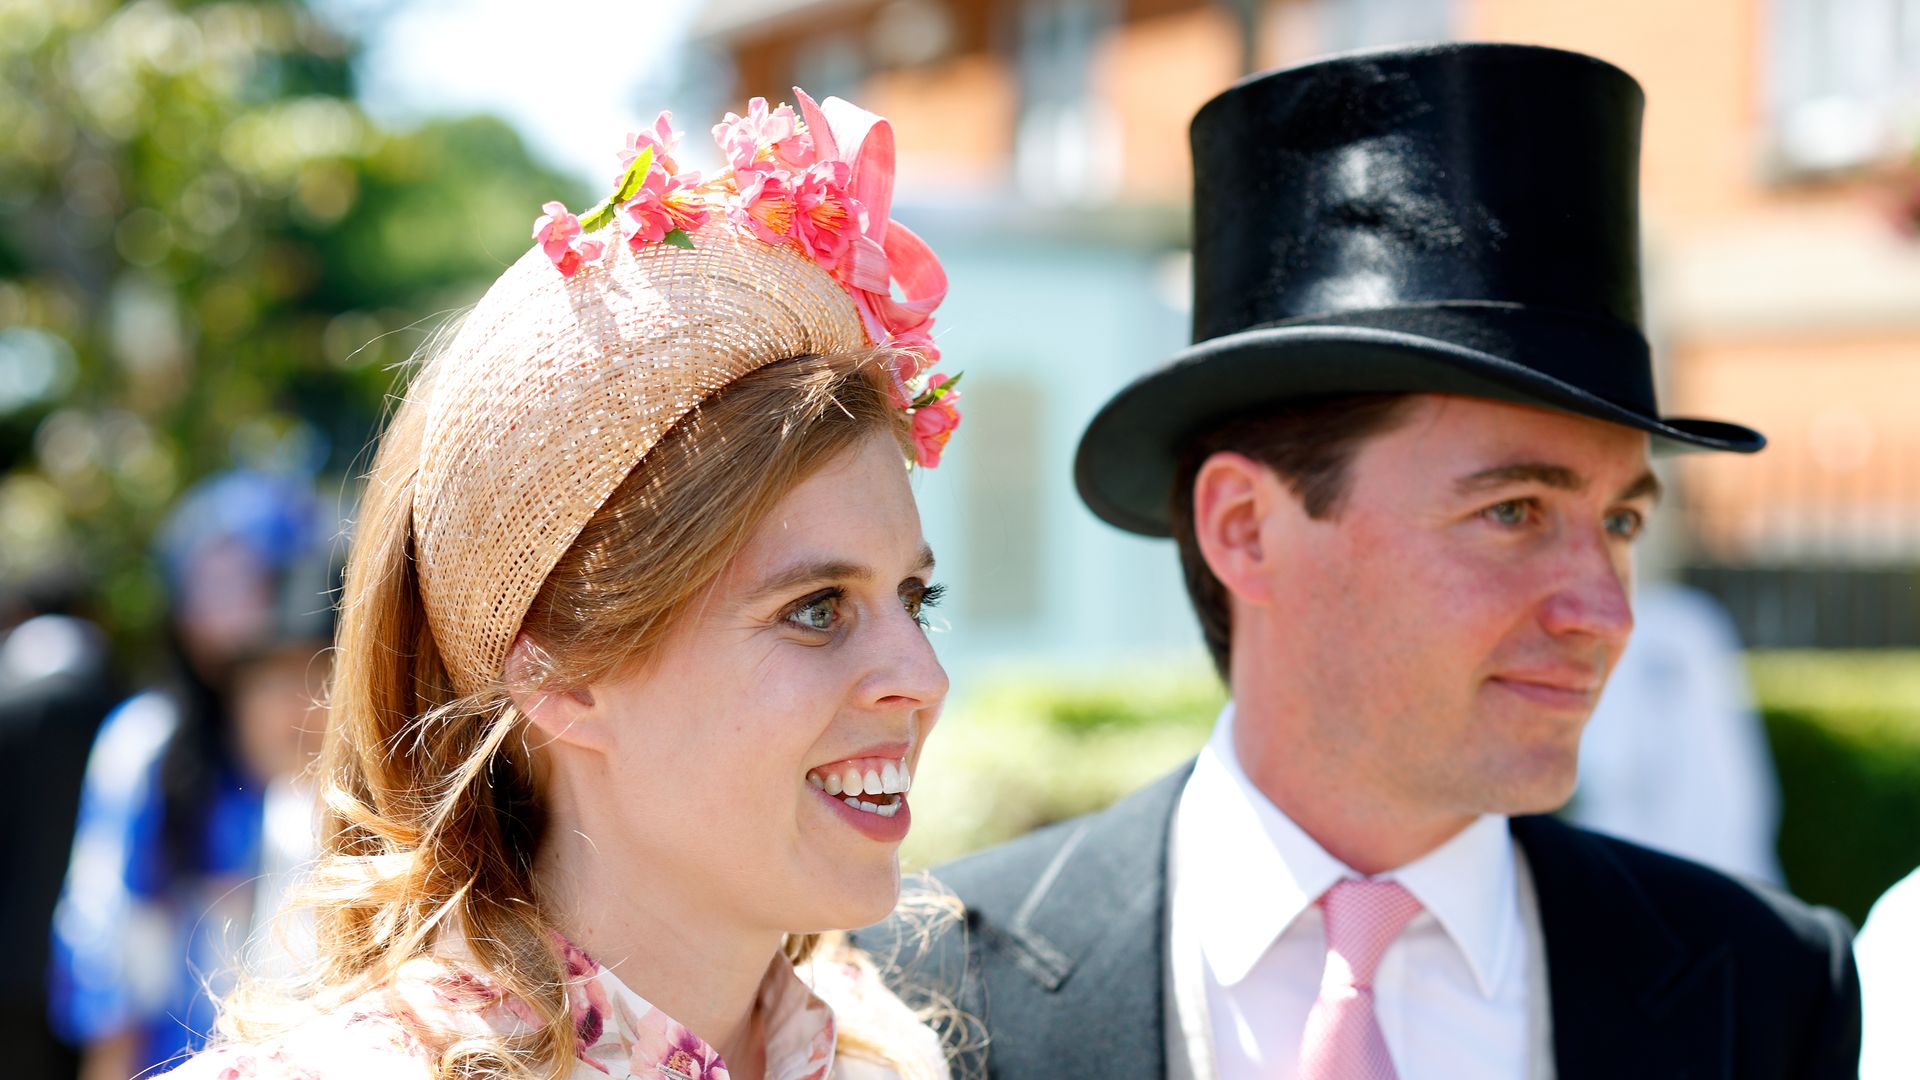  Princess Beatrice with floral look and Edoardo Mapelli Mozzi in top hat